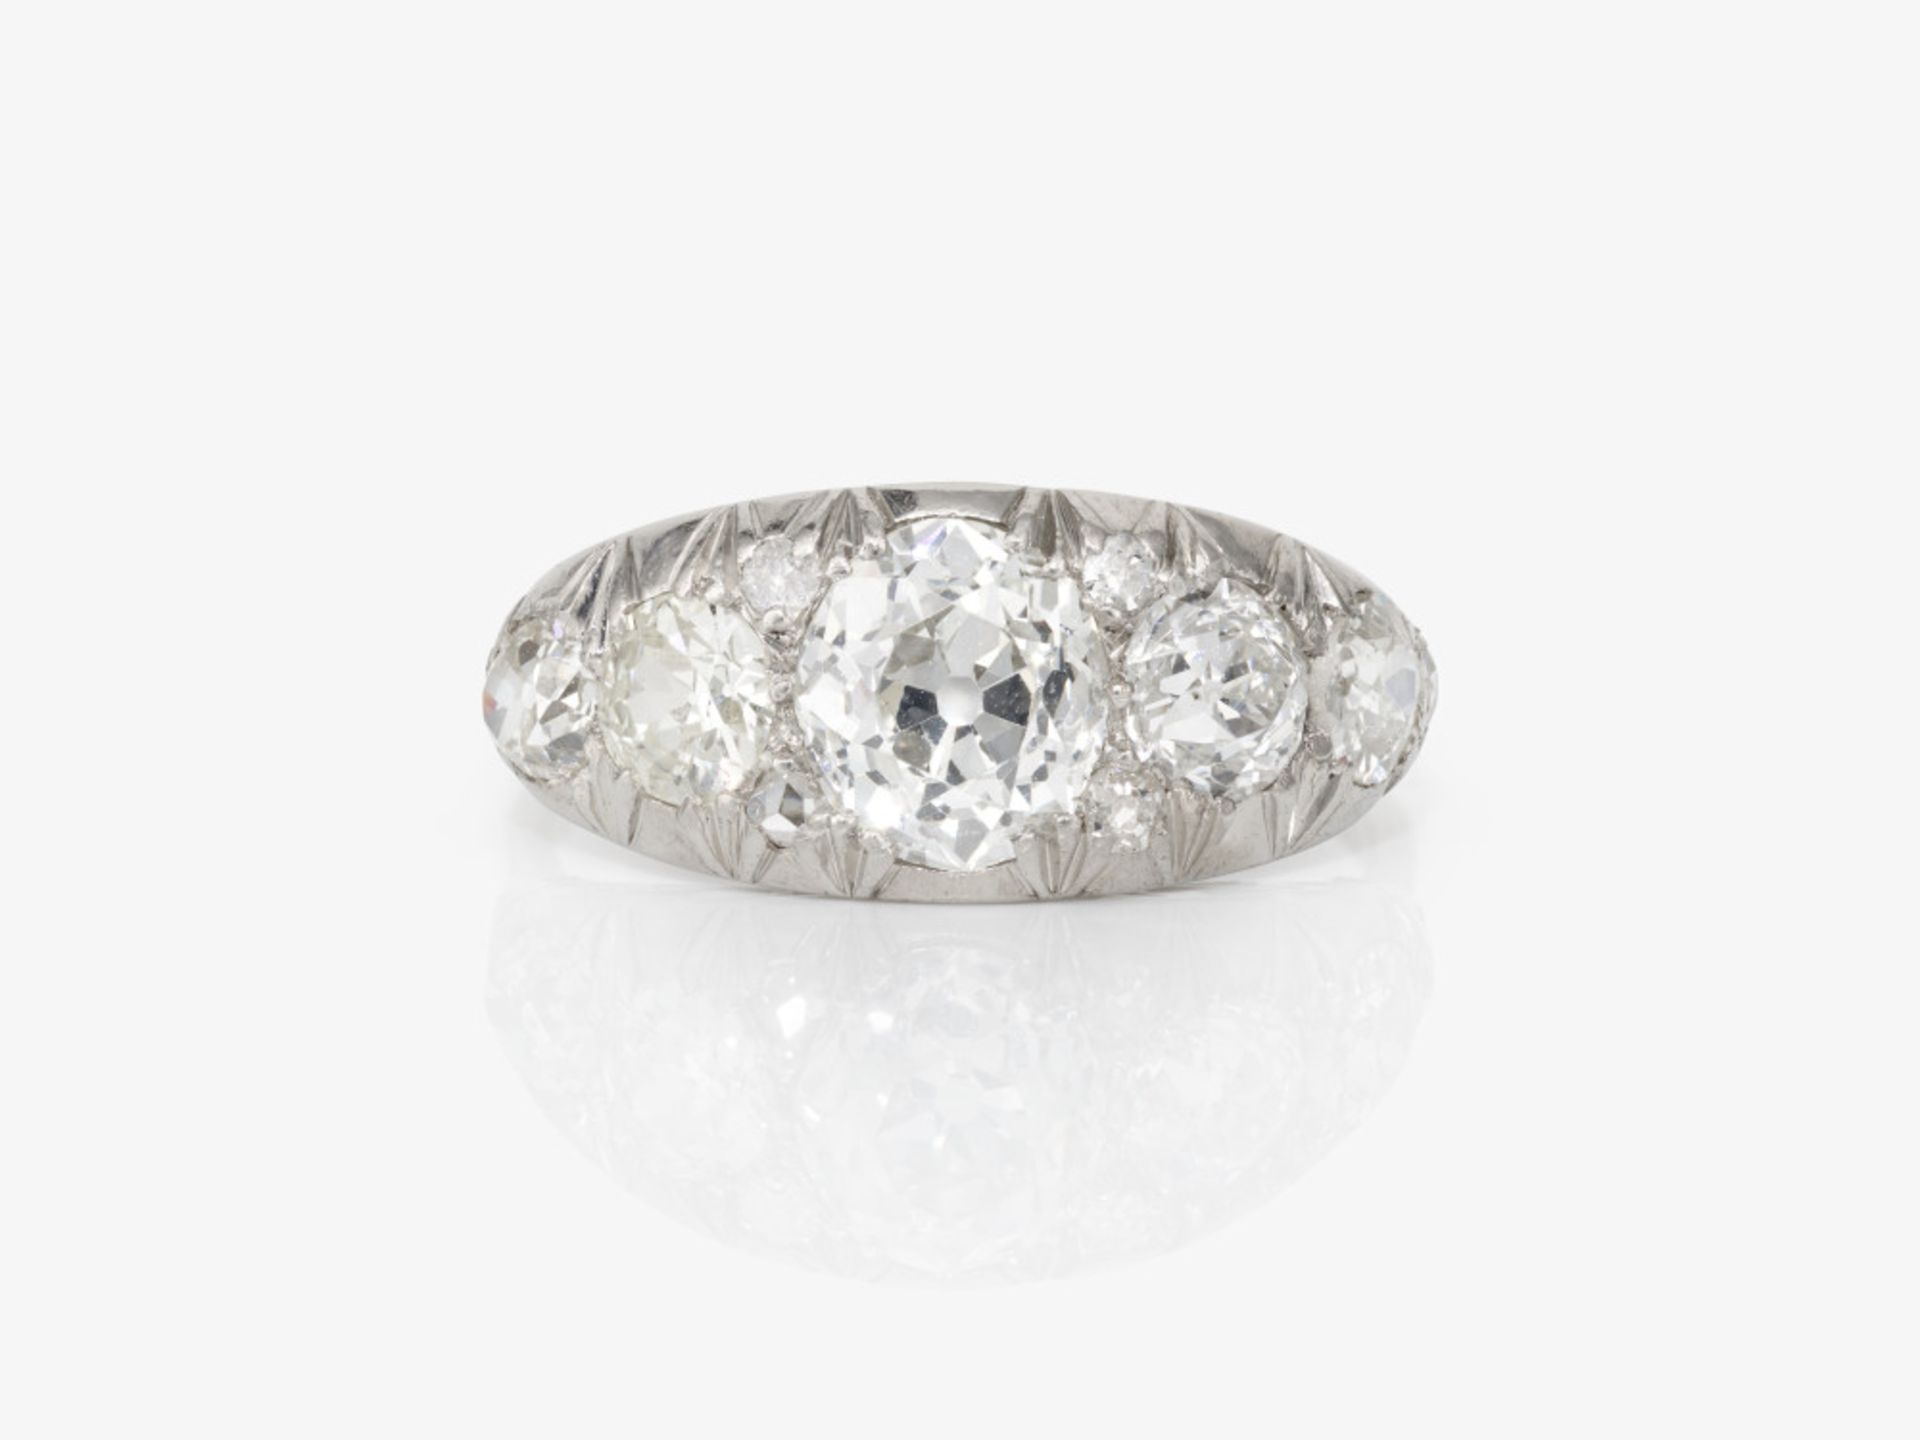 A ring with old European cut diamonds - Germany, circa 1925-1930 - Image 2 of 2